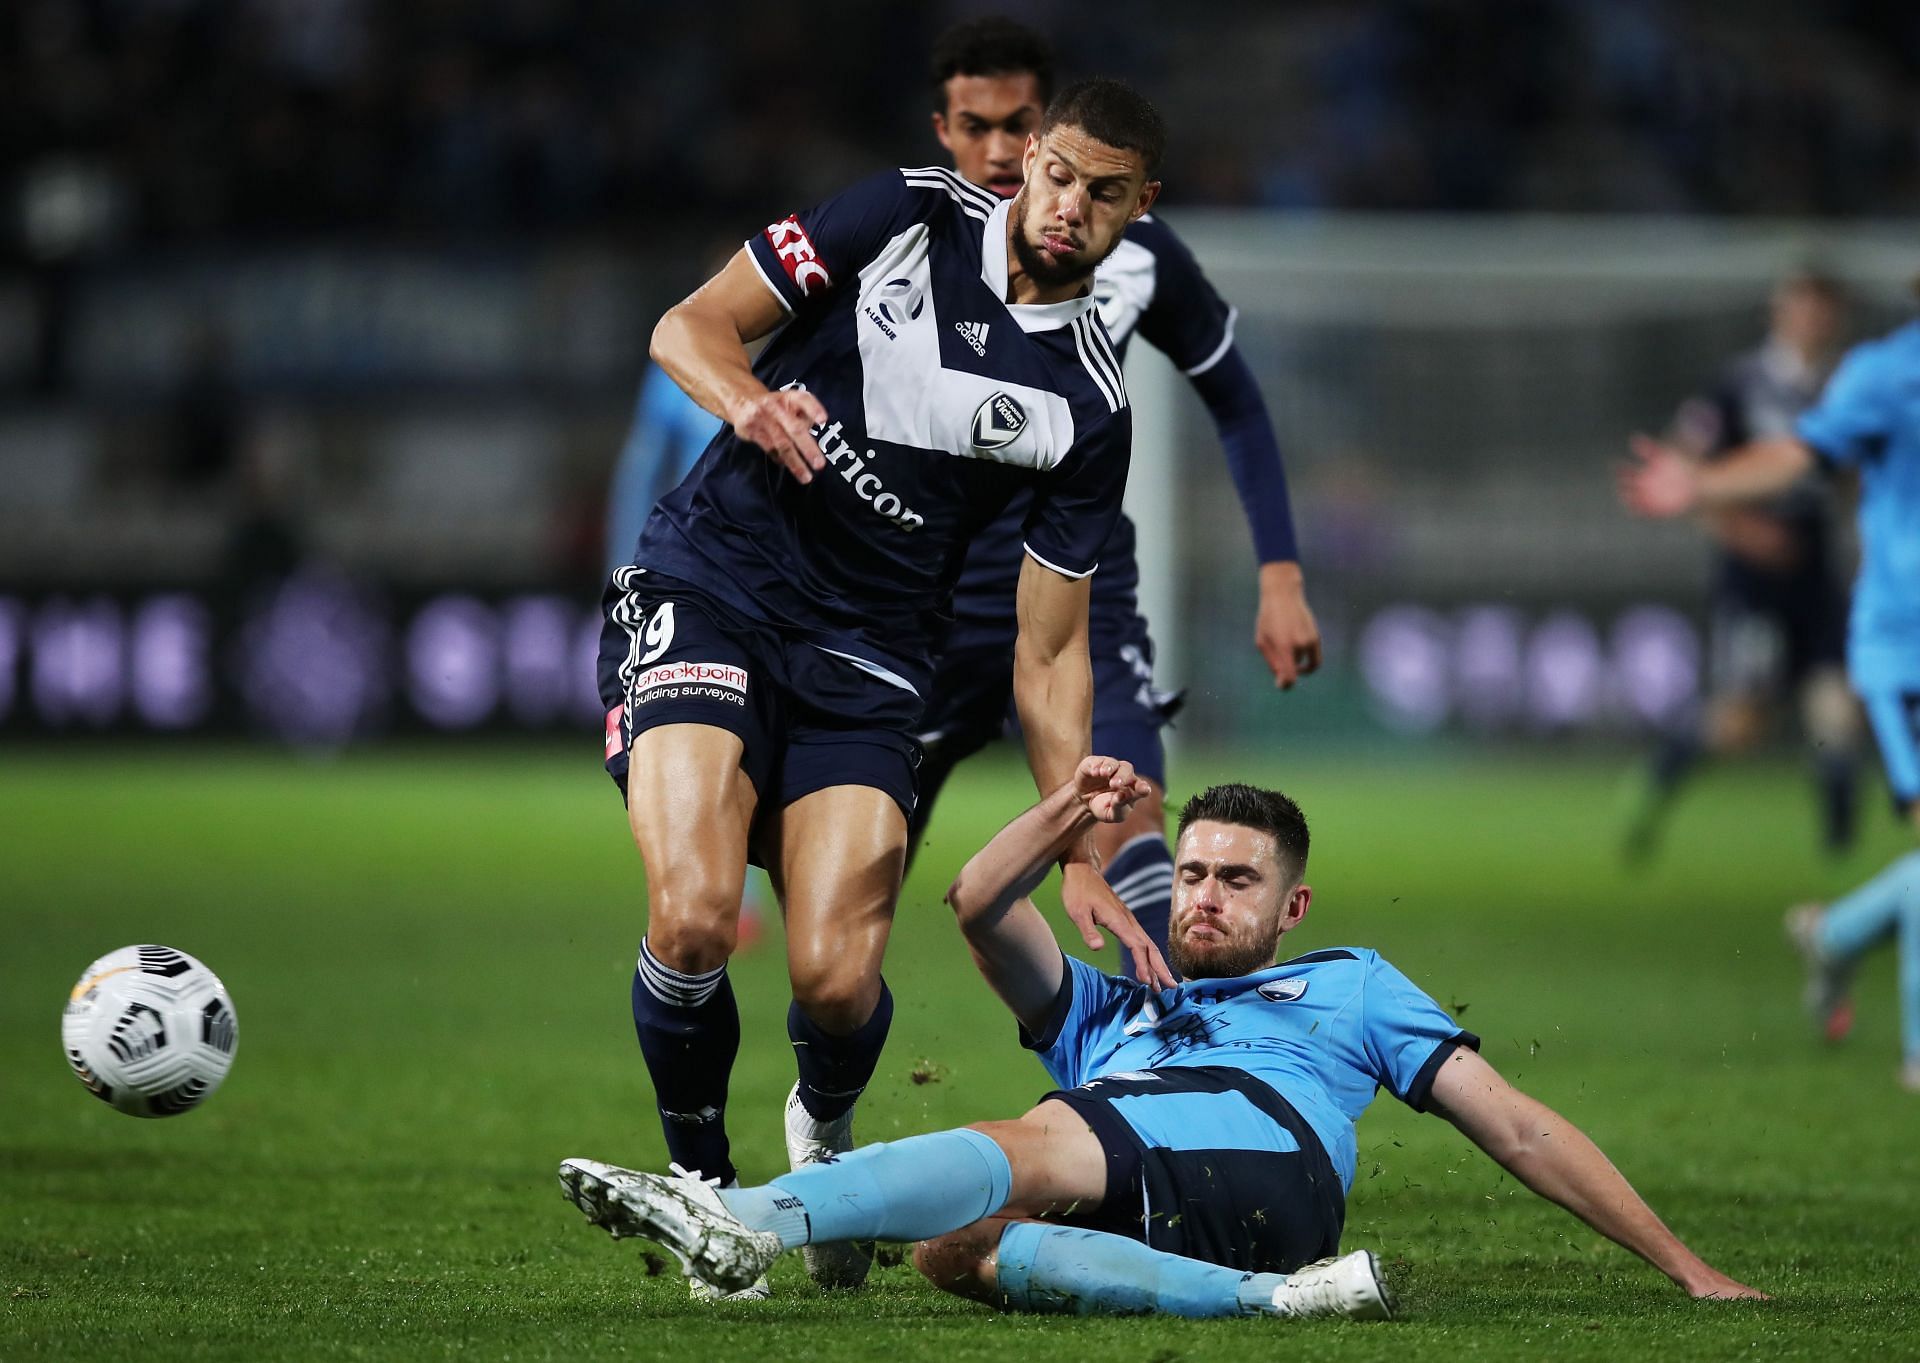 Sydney FC take on Melbourne Victory this weekend